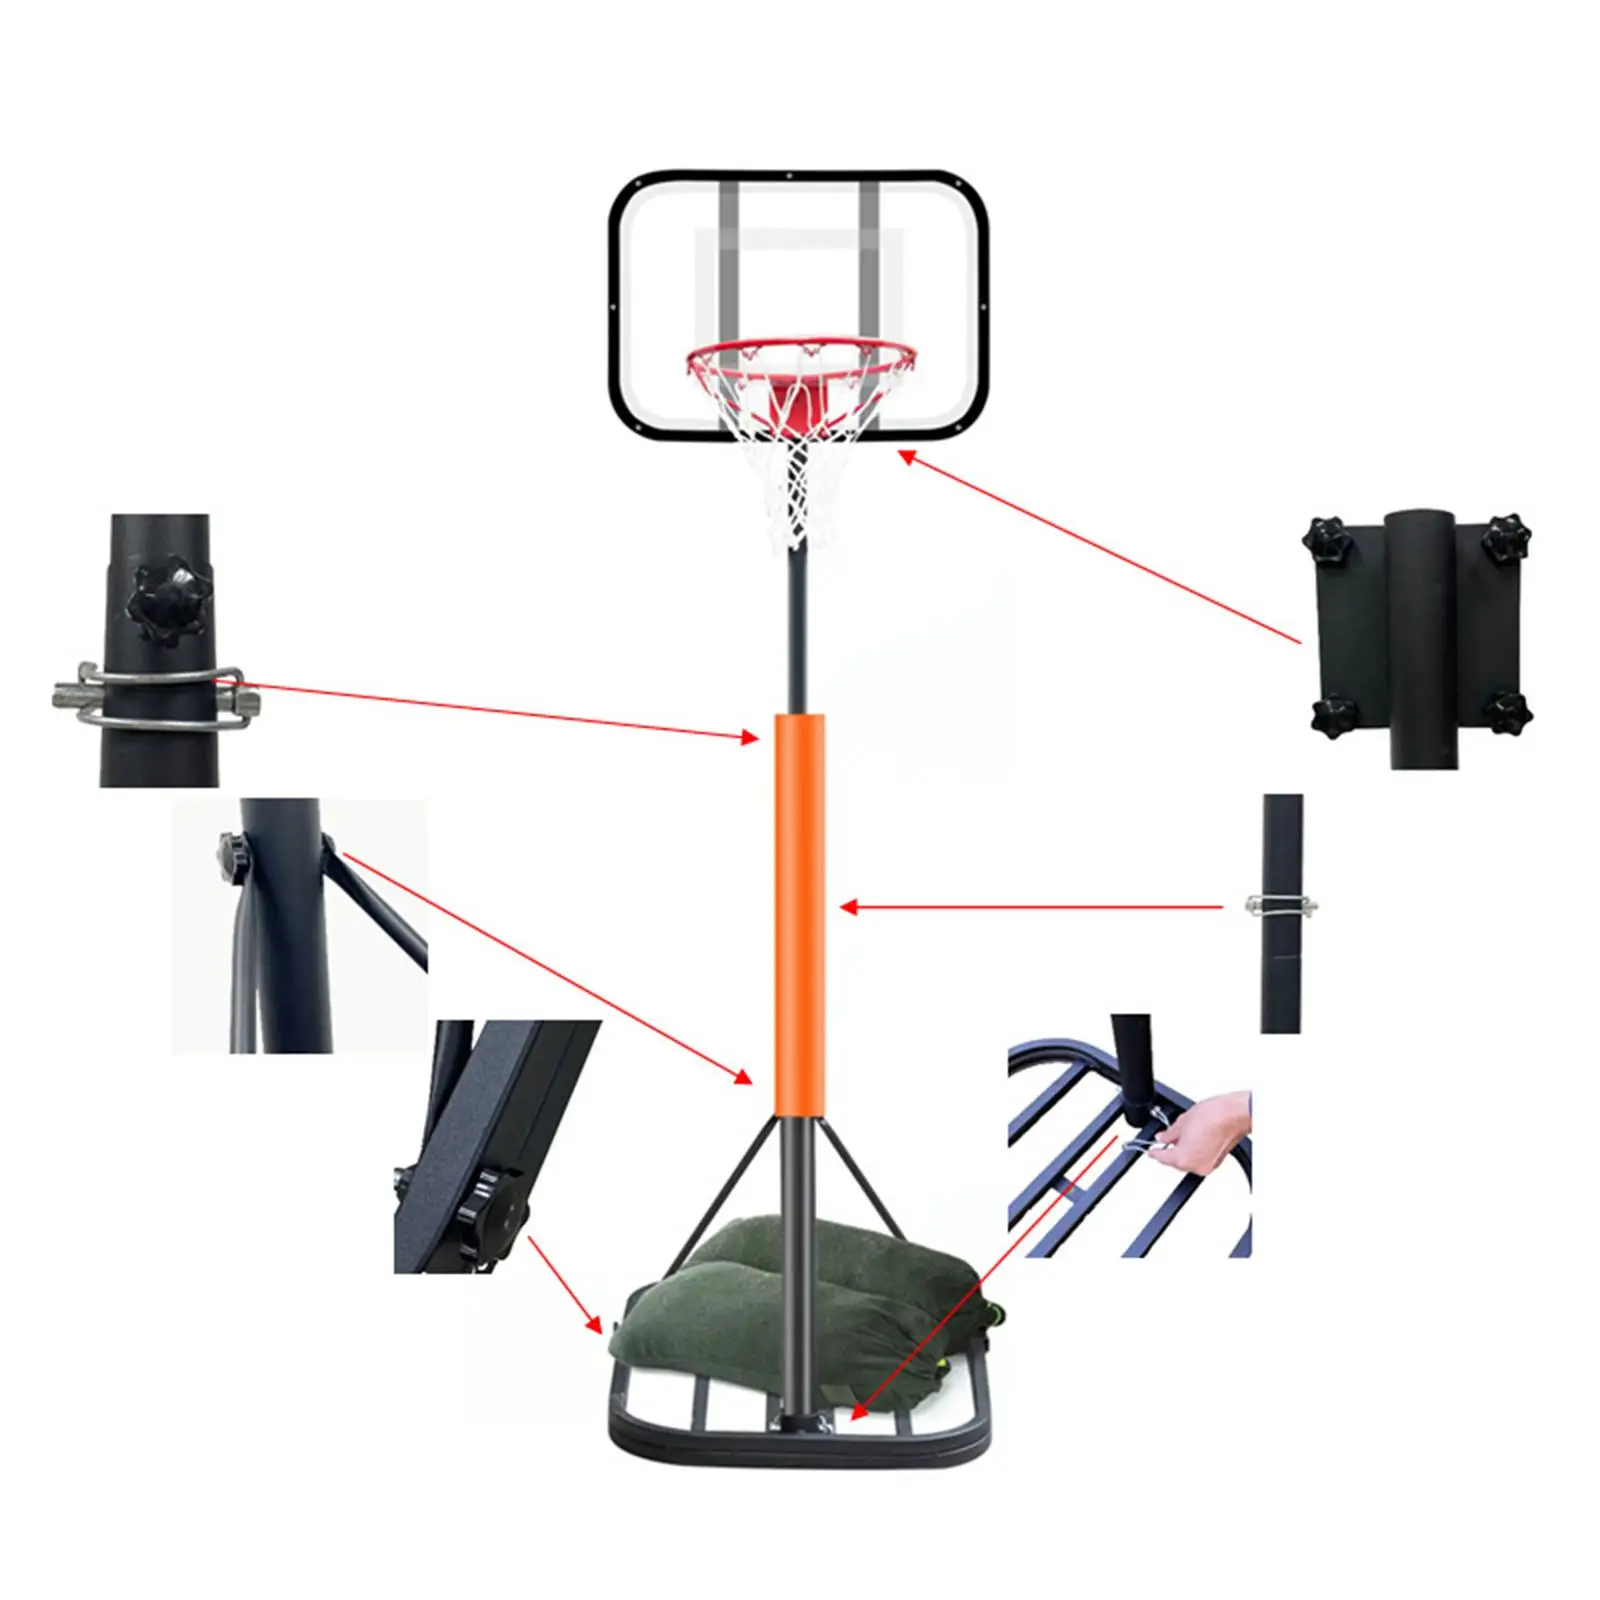 Portable Basketball Hoop Stand Adjustable Adjusts from 1.9M to 2.7M Backboard System Basketball Goal for Backyard Game Outside